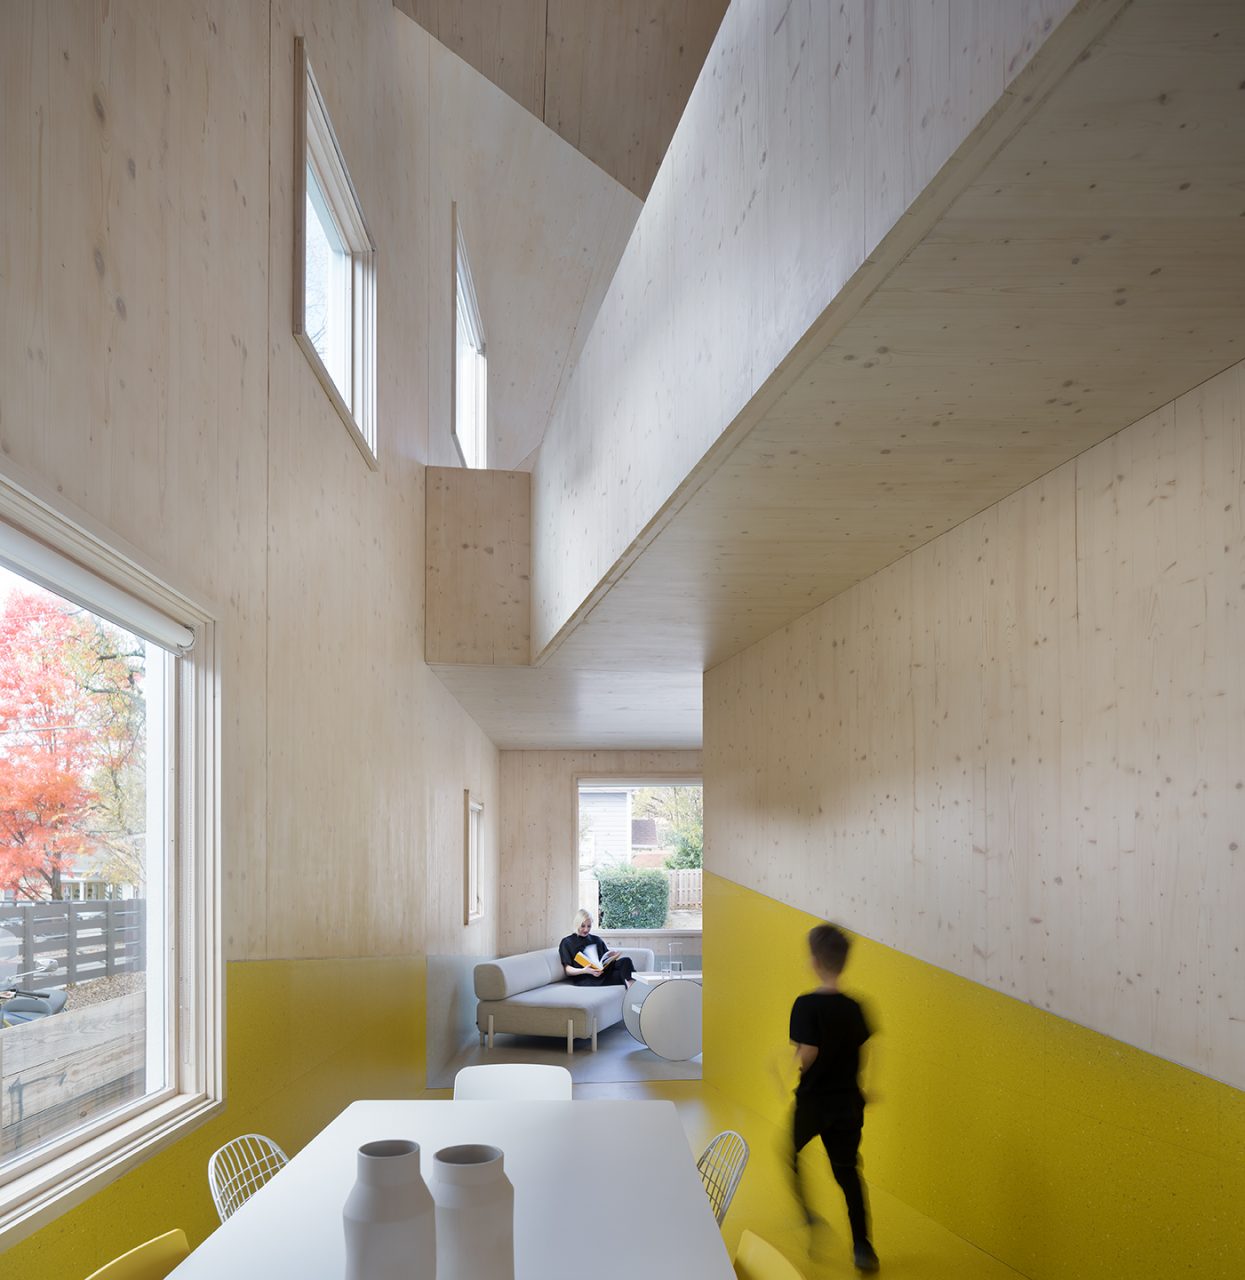 Image of Haus Gables interior with CLT exposed walls and yellow paint